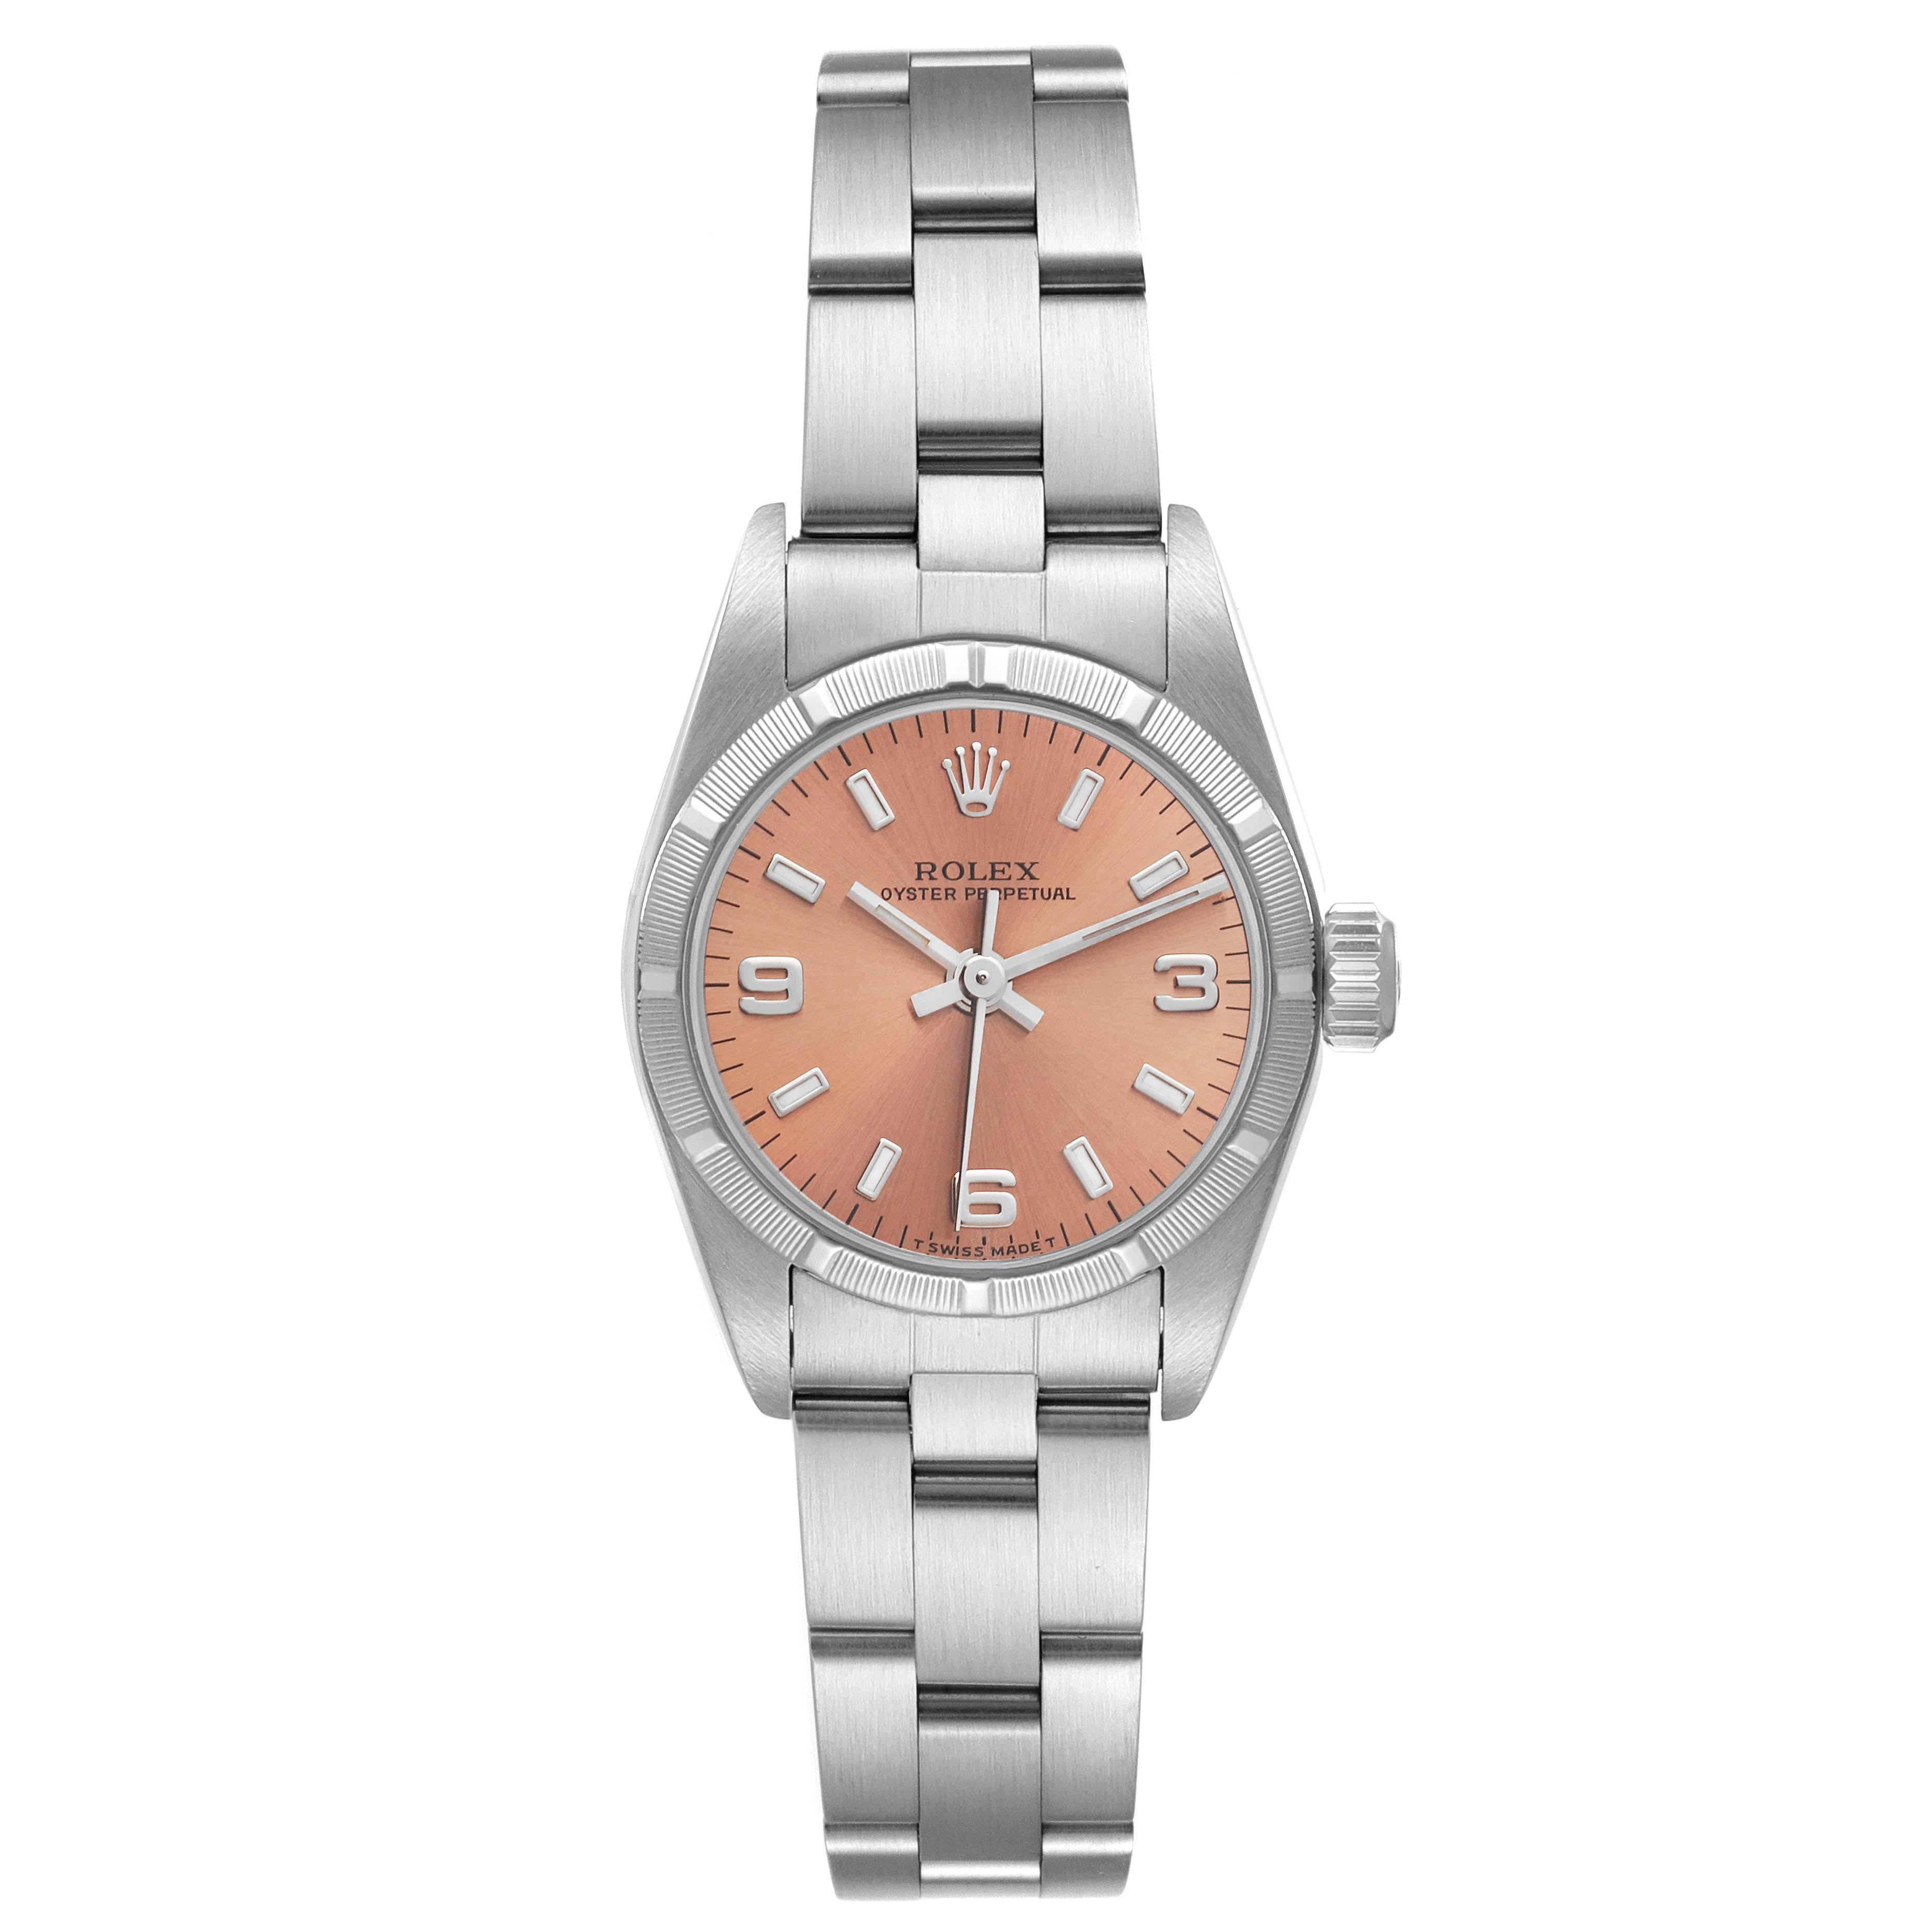 Rolex Oyster Perpetual Salmon Dial Oyster Bracelet Ladies Watch 67230 Box Papers. Officially certified chronometer automatic self-winding movement. Stainless steel oyster case 24.0 mm in diameter. Rolex logo on the crown. Stainless steel engine